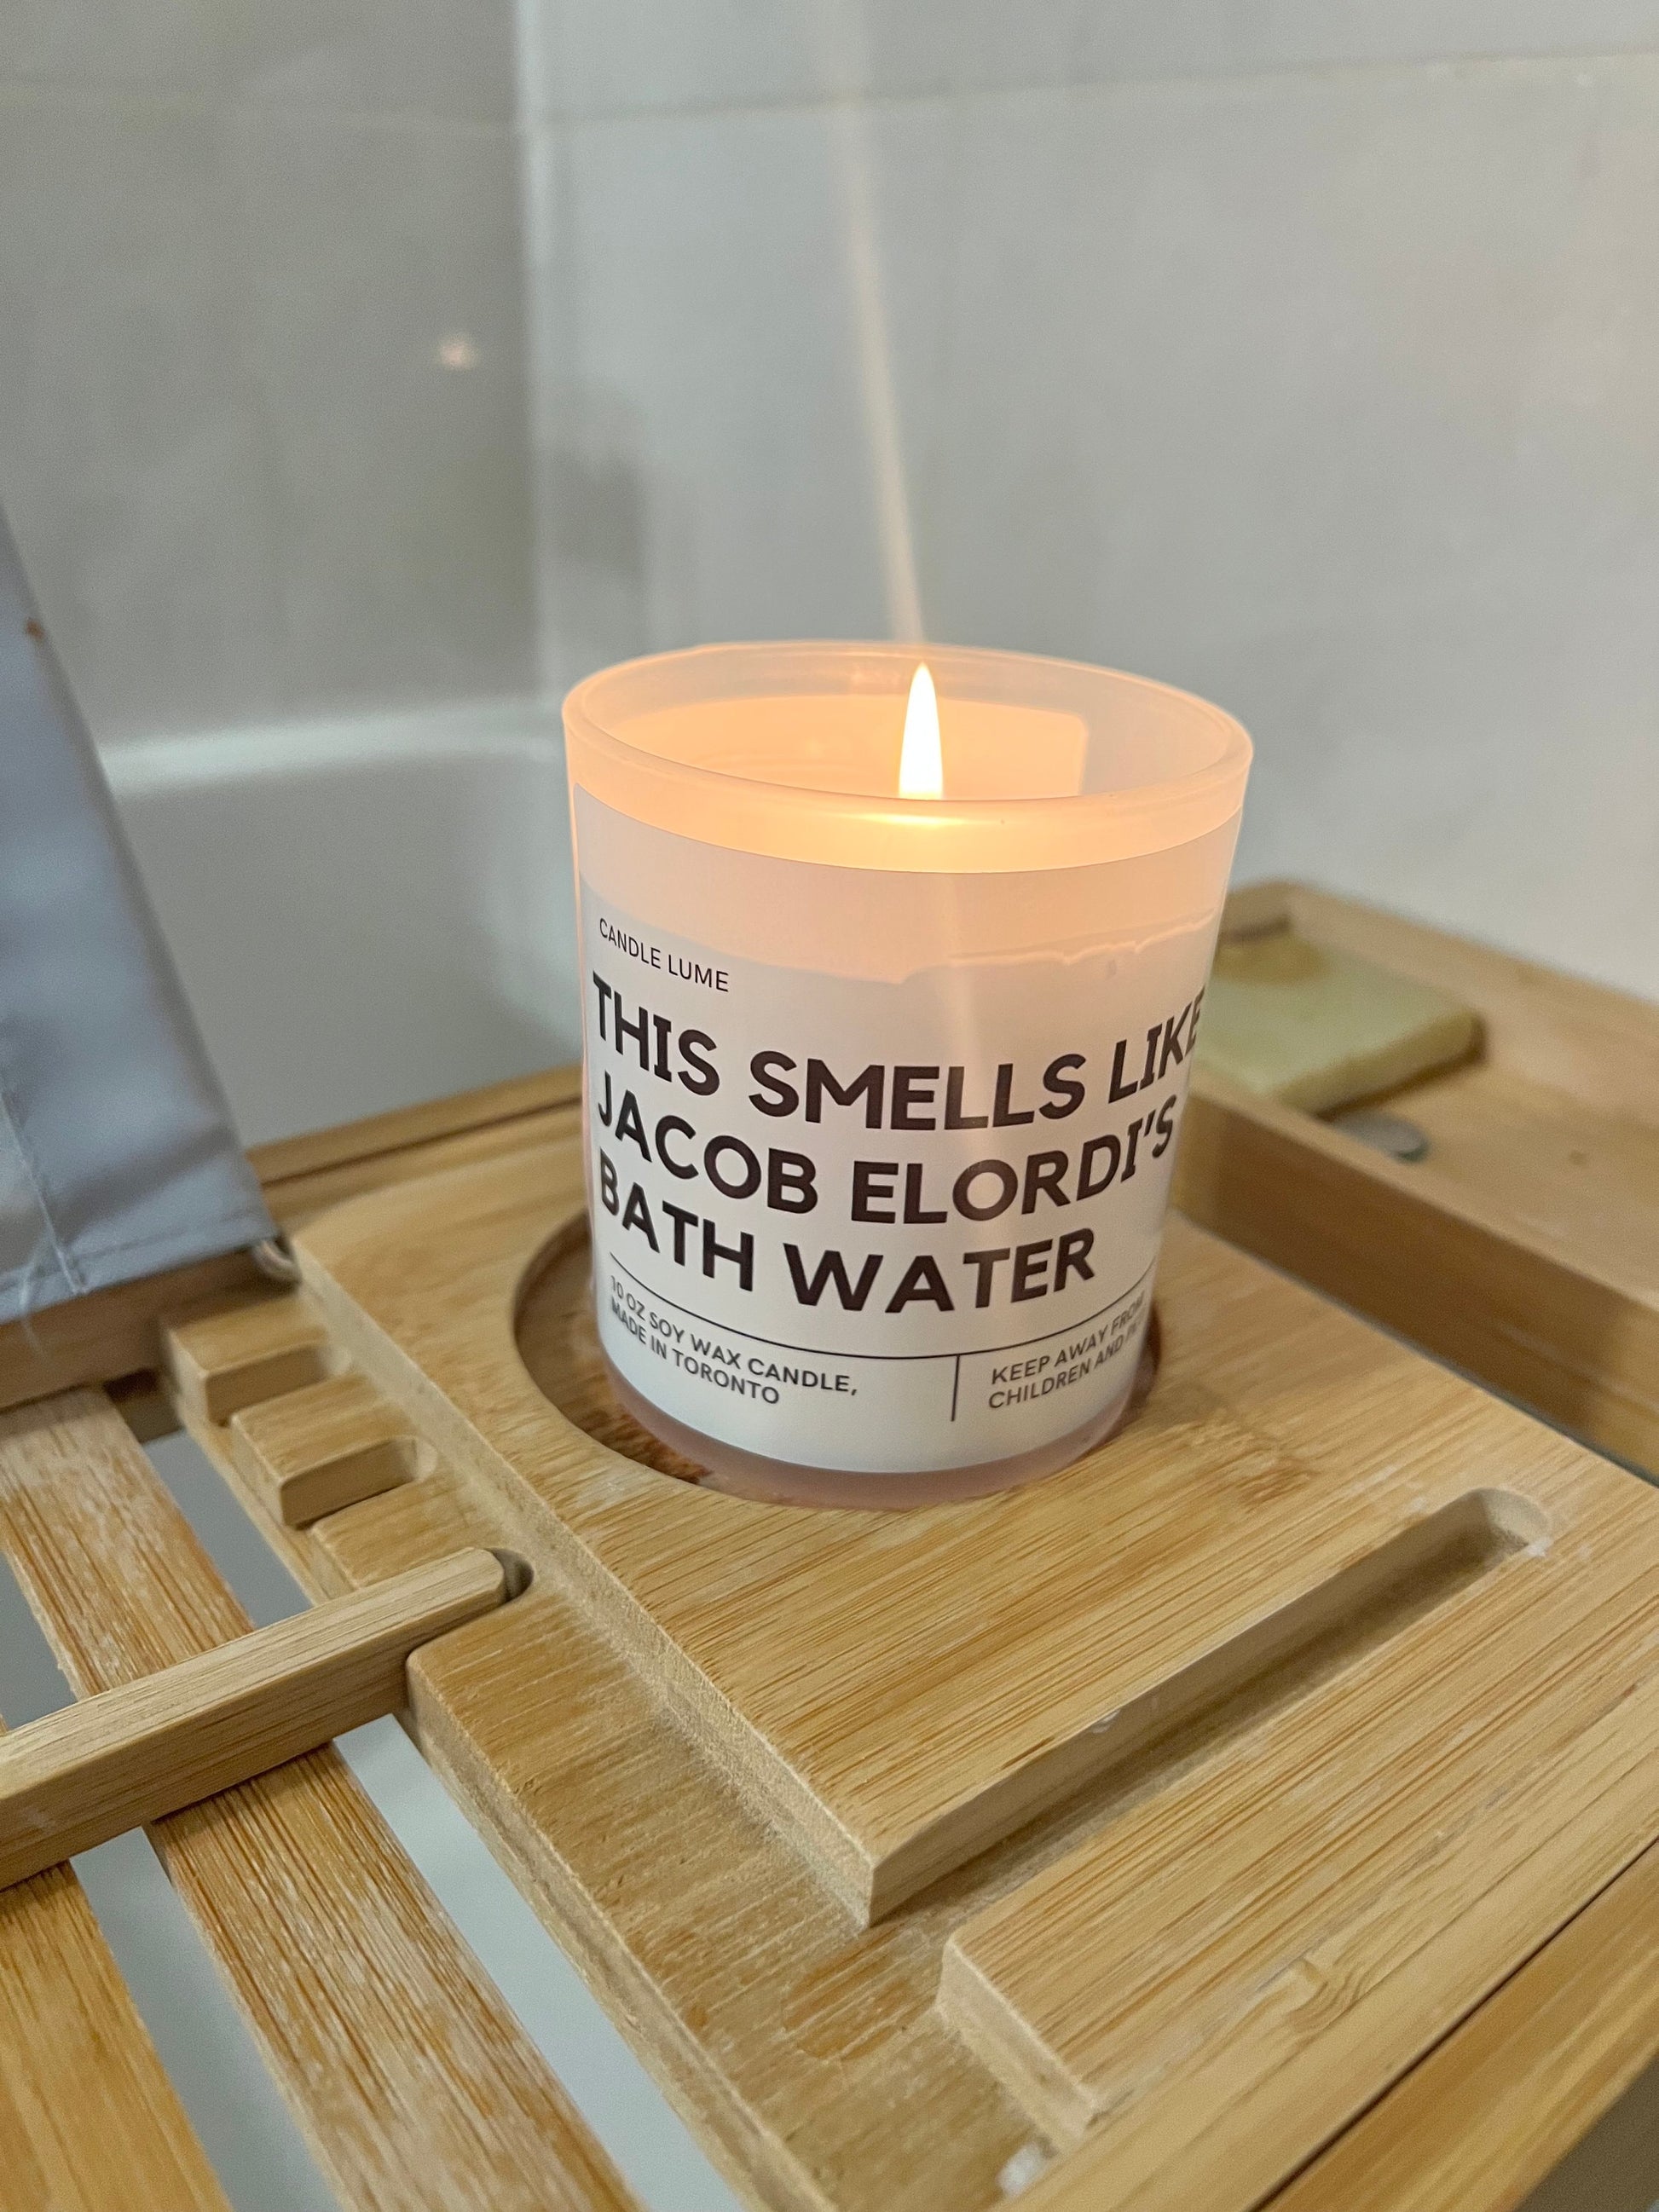 This Smells Like Jacob Elordis Bath Water Candle/ salt burn candle / funny Candle / Jar Candle / Soy Wax / Cool Candle / Beautiful Candle